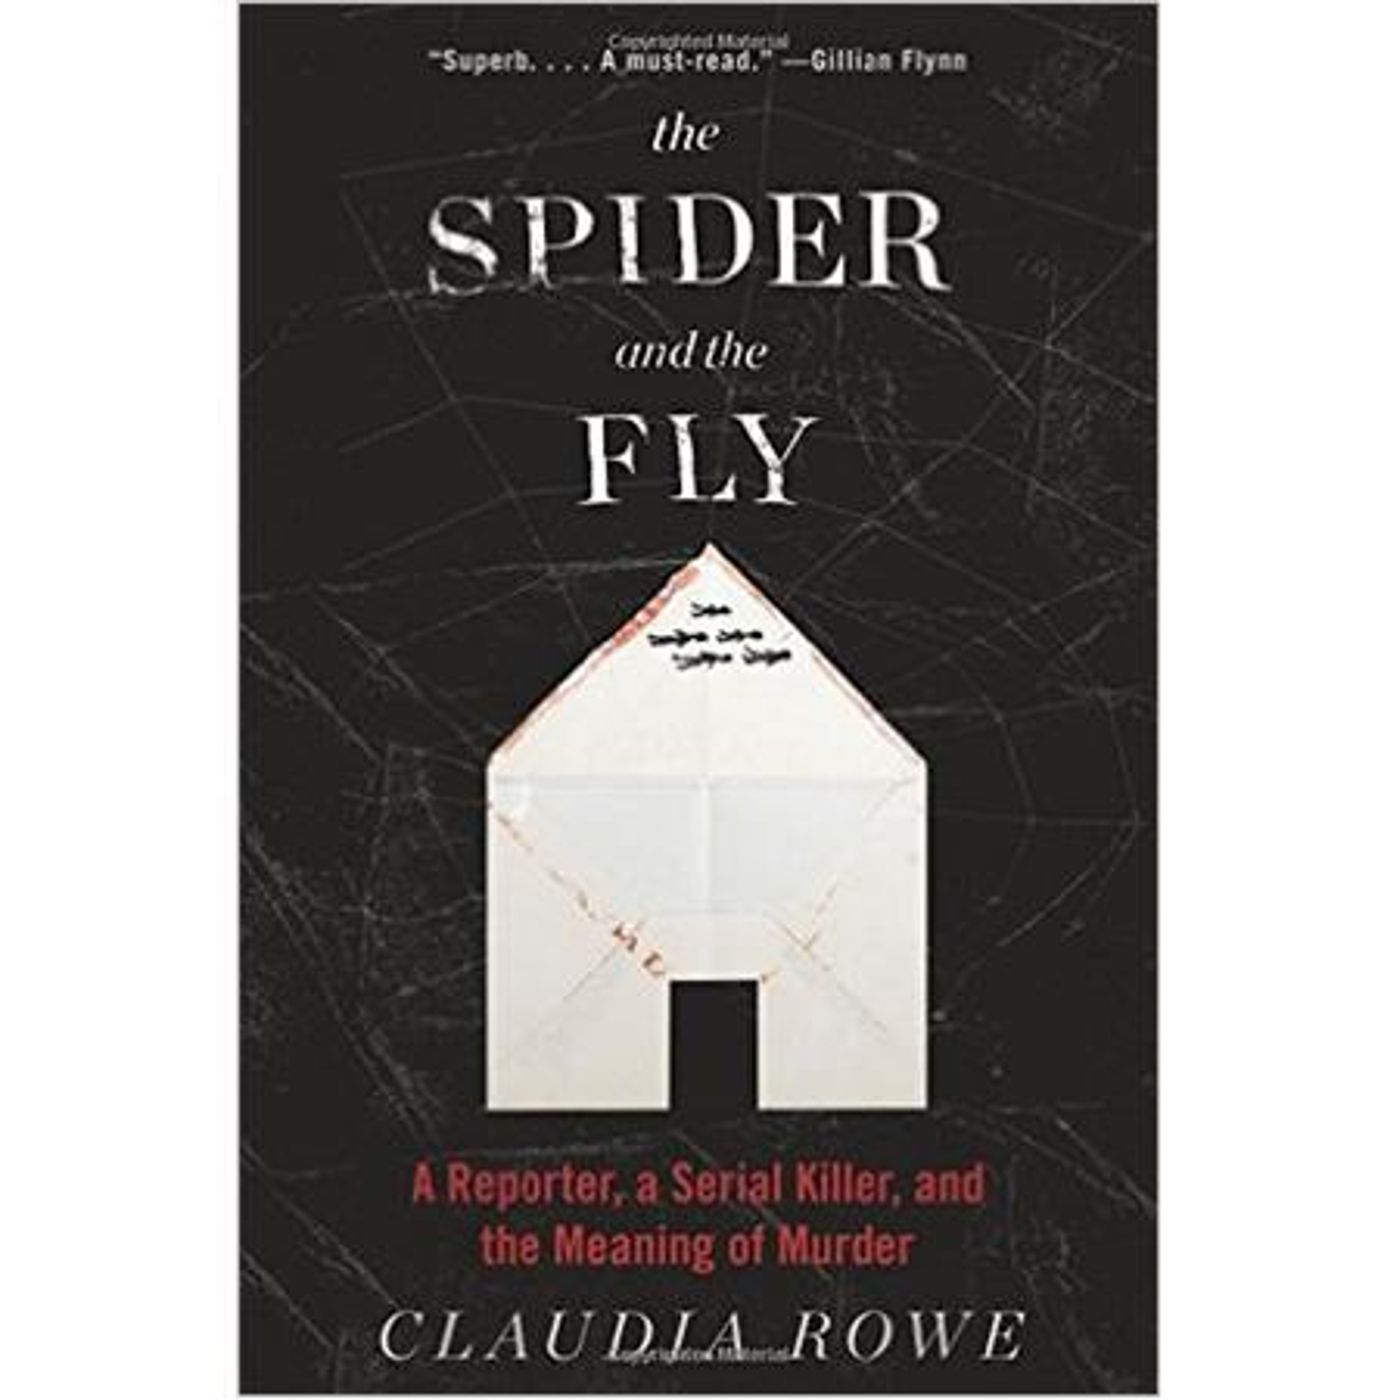 THE SPIDER AND THE FLY-Claudia Rowe